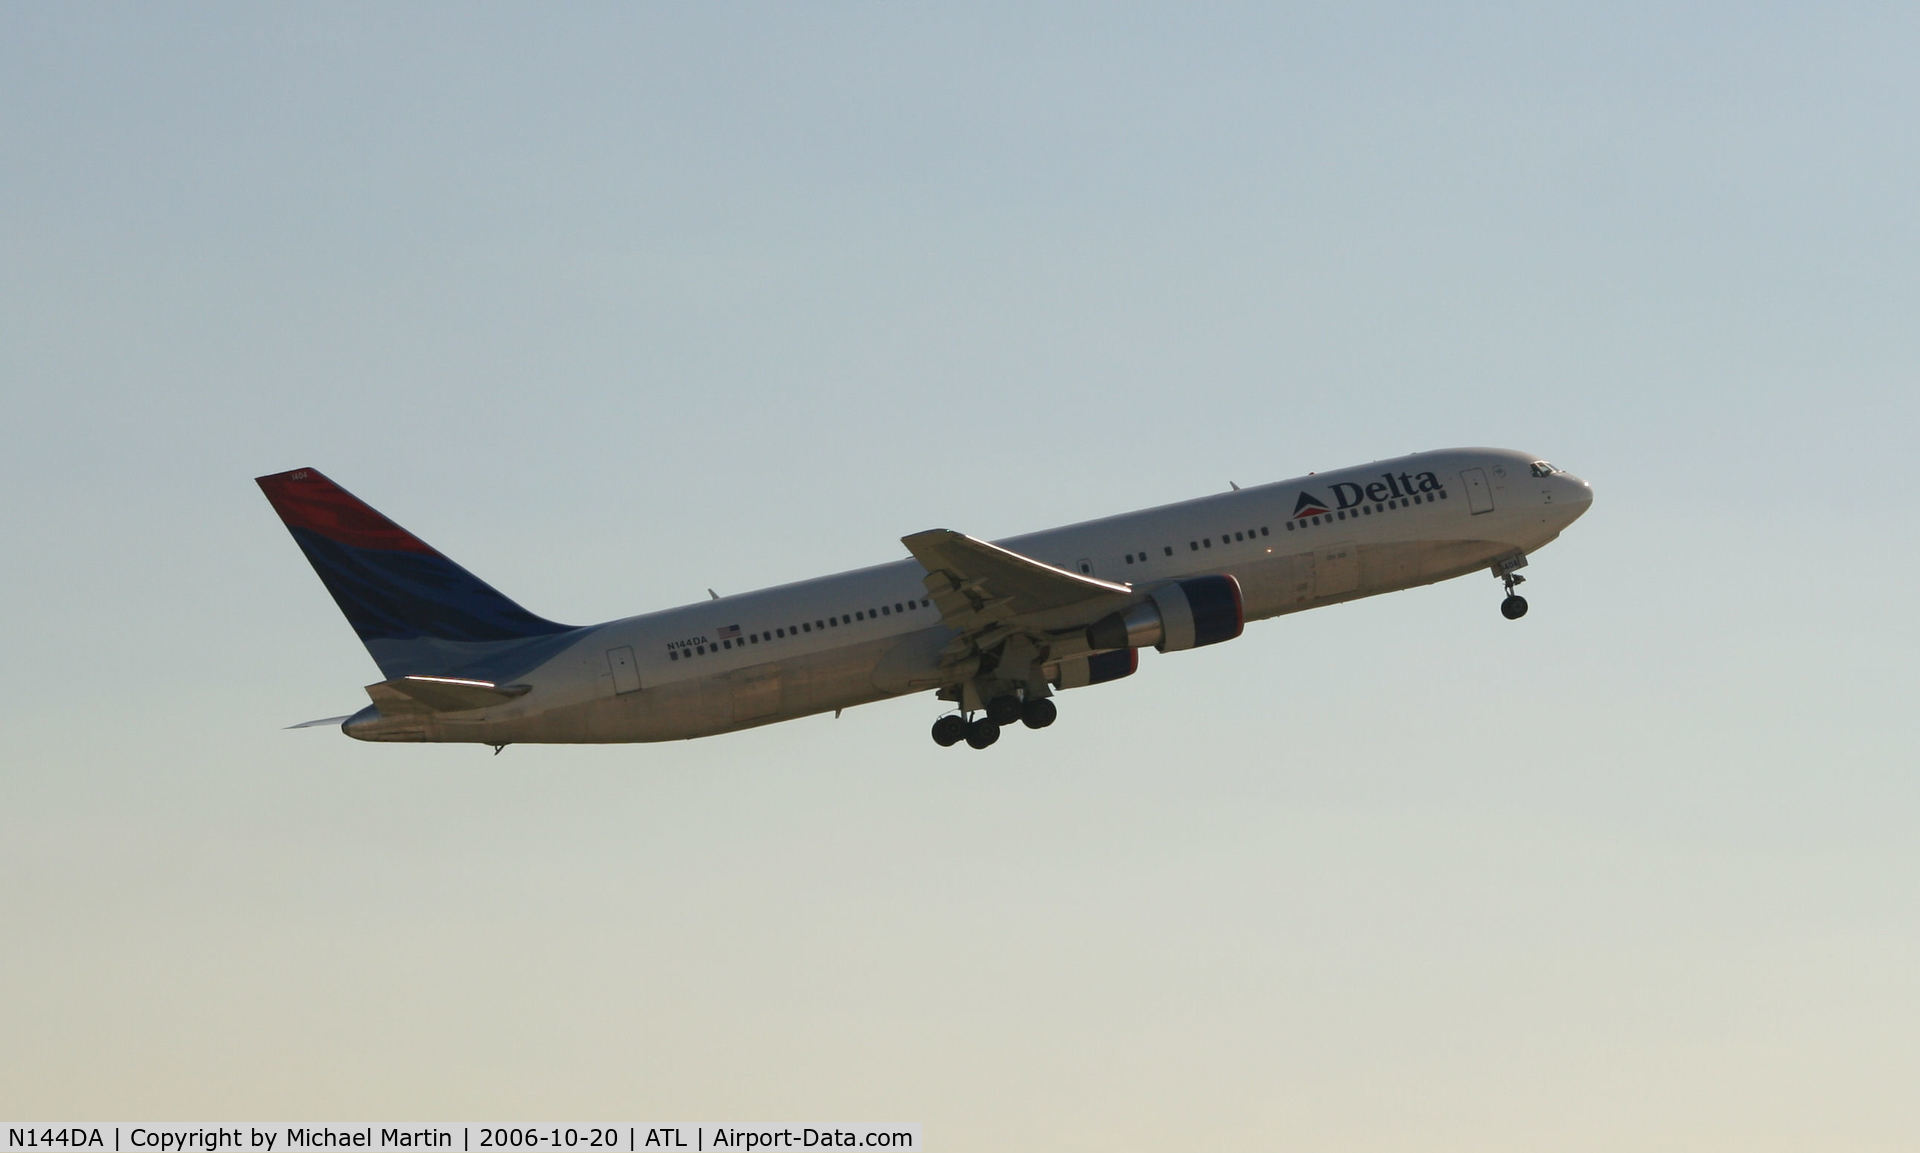 N144DA, 1999 Boeing 767-332 C/N 27584, Departing ATL for parts unknown!